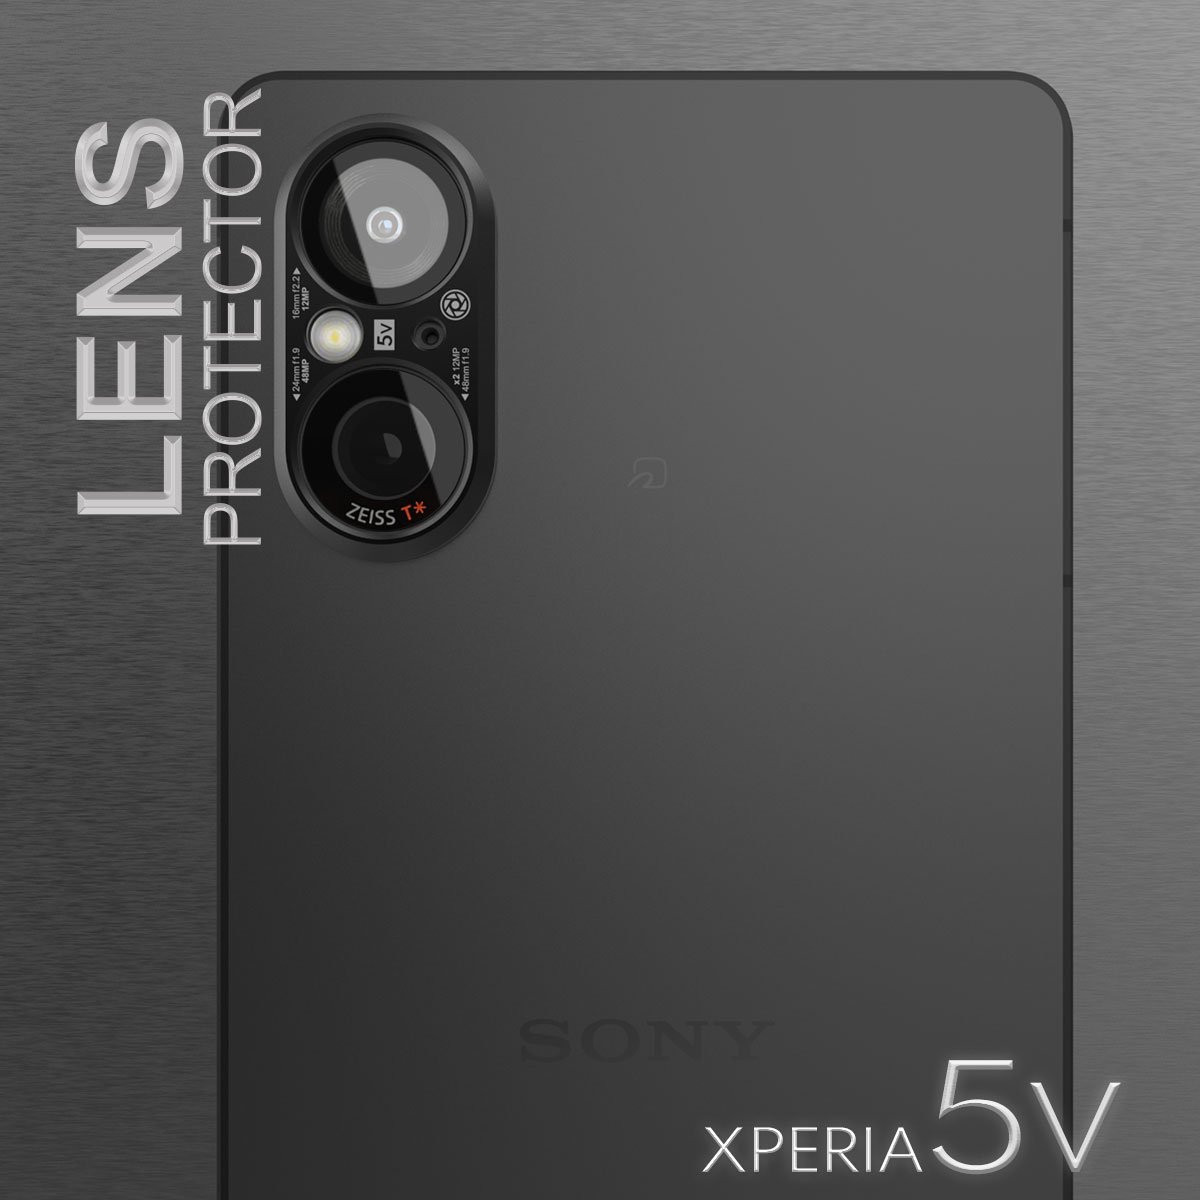 <img class='new_mark_img1' src='https://img.shop-pro.jp/img/new/icons1.gif' style='border:none;display:inline;margin:0px;padding:0px;width:auto;' />LENS PROTECTOR for XPERIA 5 V(ե֡ޡե)